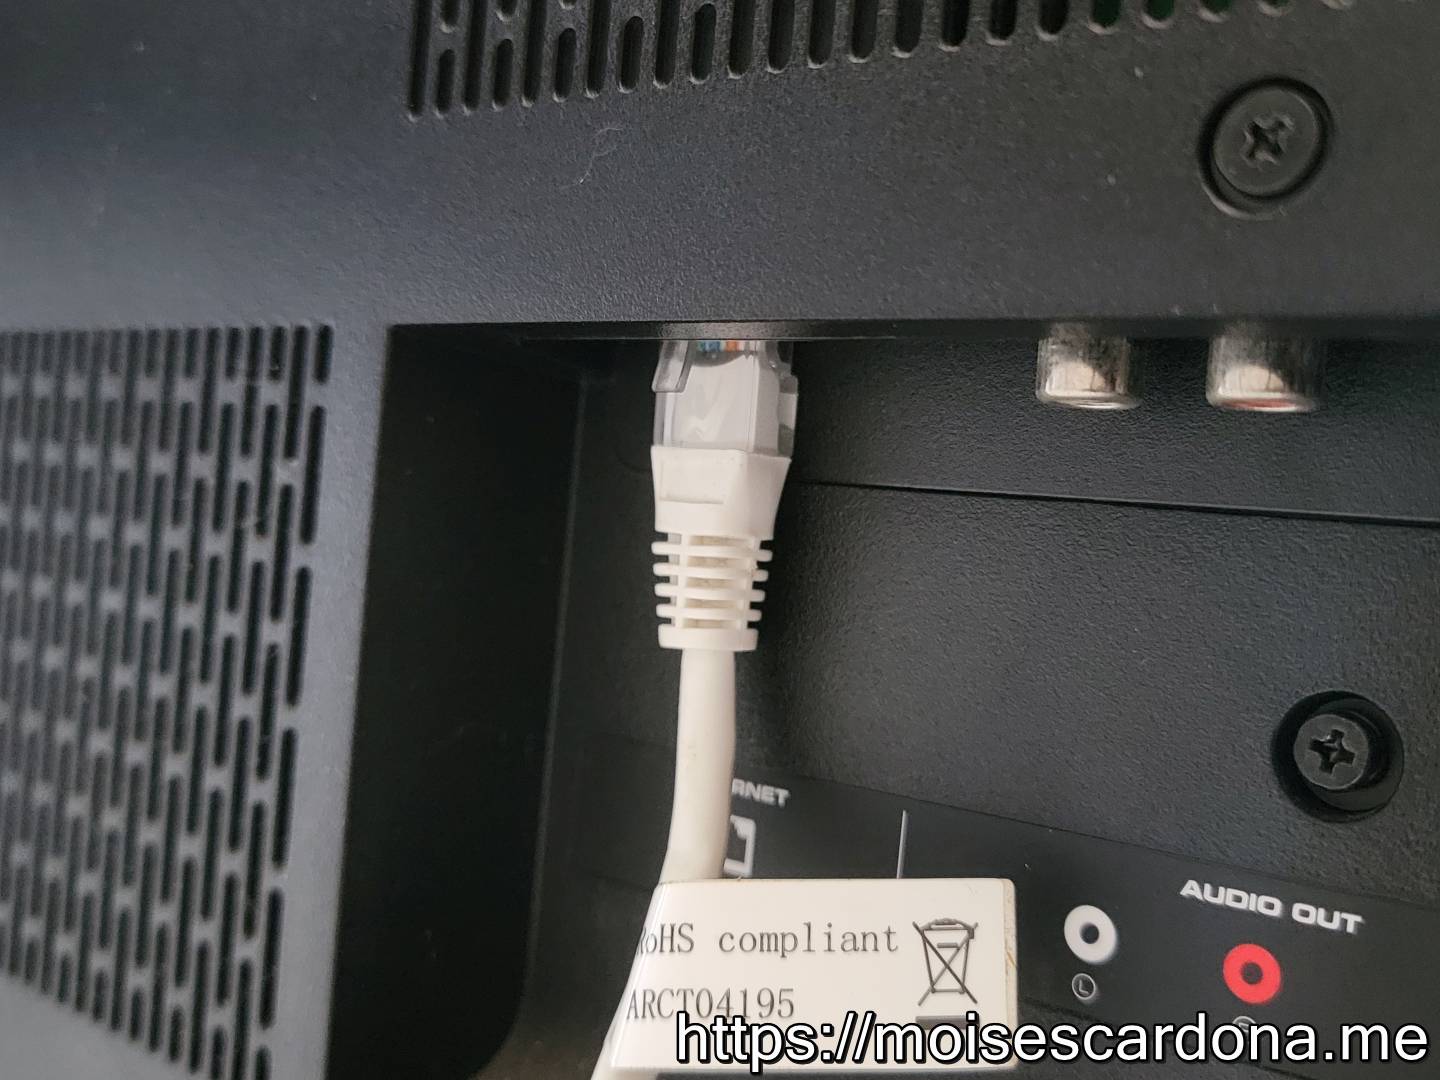 TP-Link AC750 Wifi Extender (RE215) - TV connected to the extender using a LAN cable